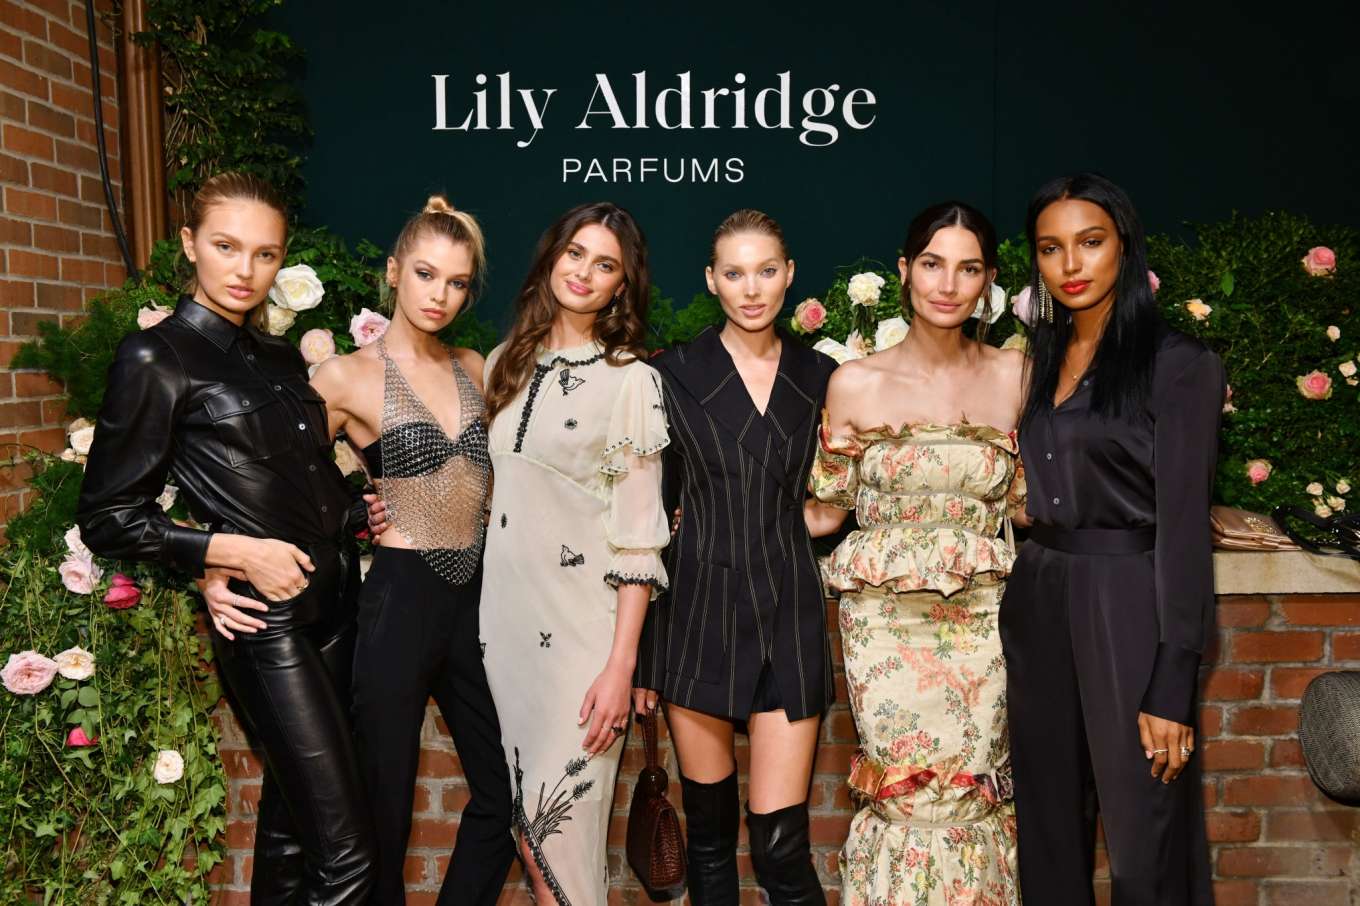 Taylor Hill 2019 : Taylor Hill – Lily Aldridge Parfums Launch Event in NYC-13